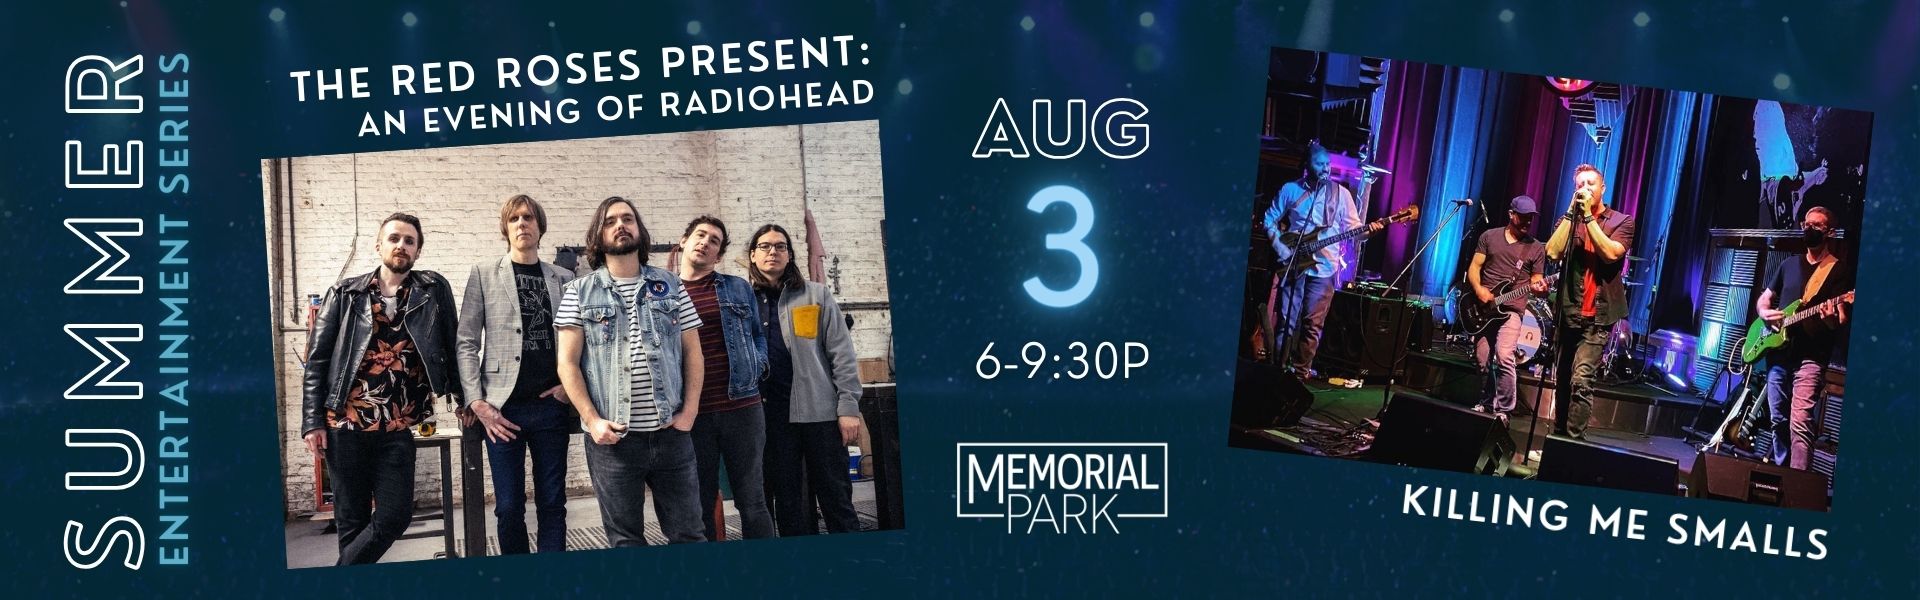 Memorial Park performance featuring The Red Roses and Killing Me Smalls